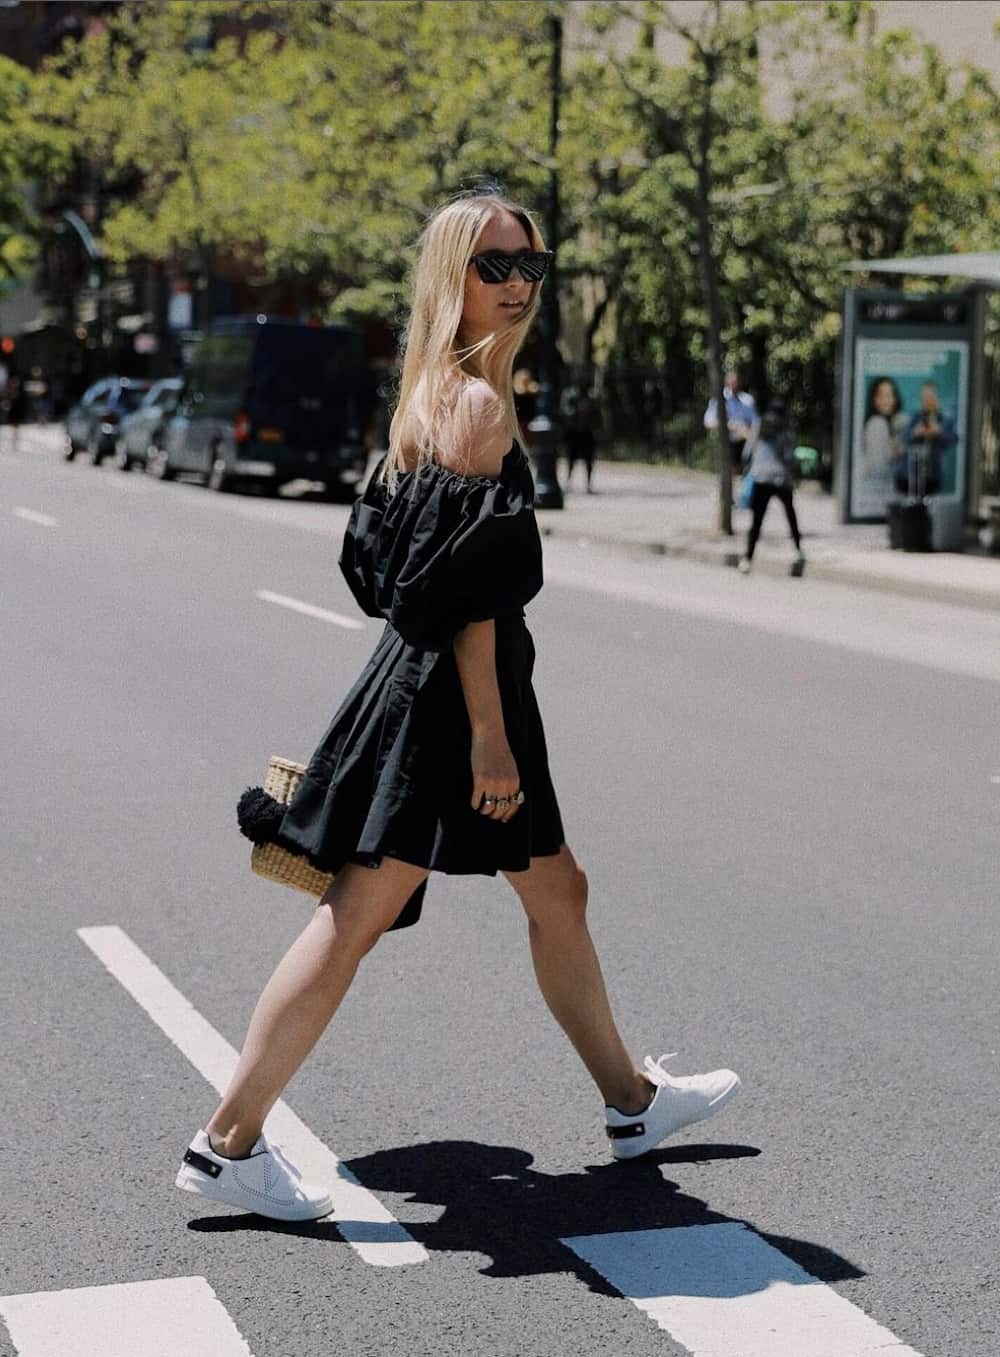 Woman wearing a black dress, sneakers and carrying a straw bag.